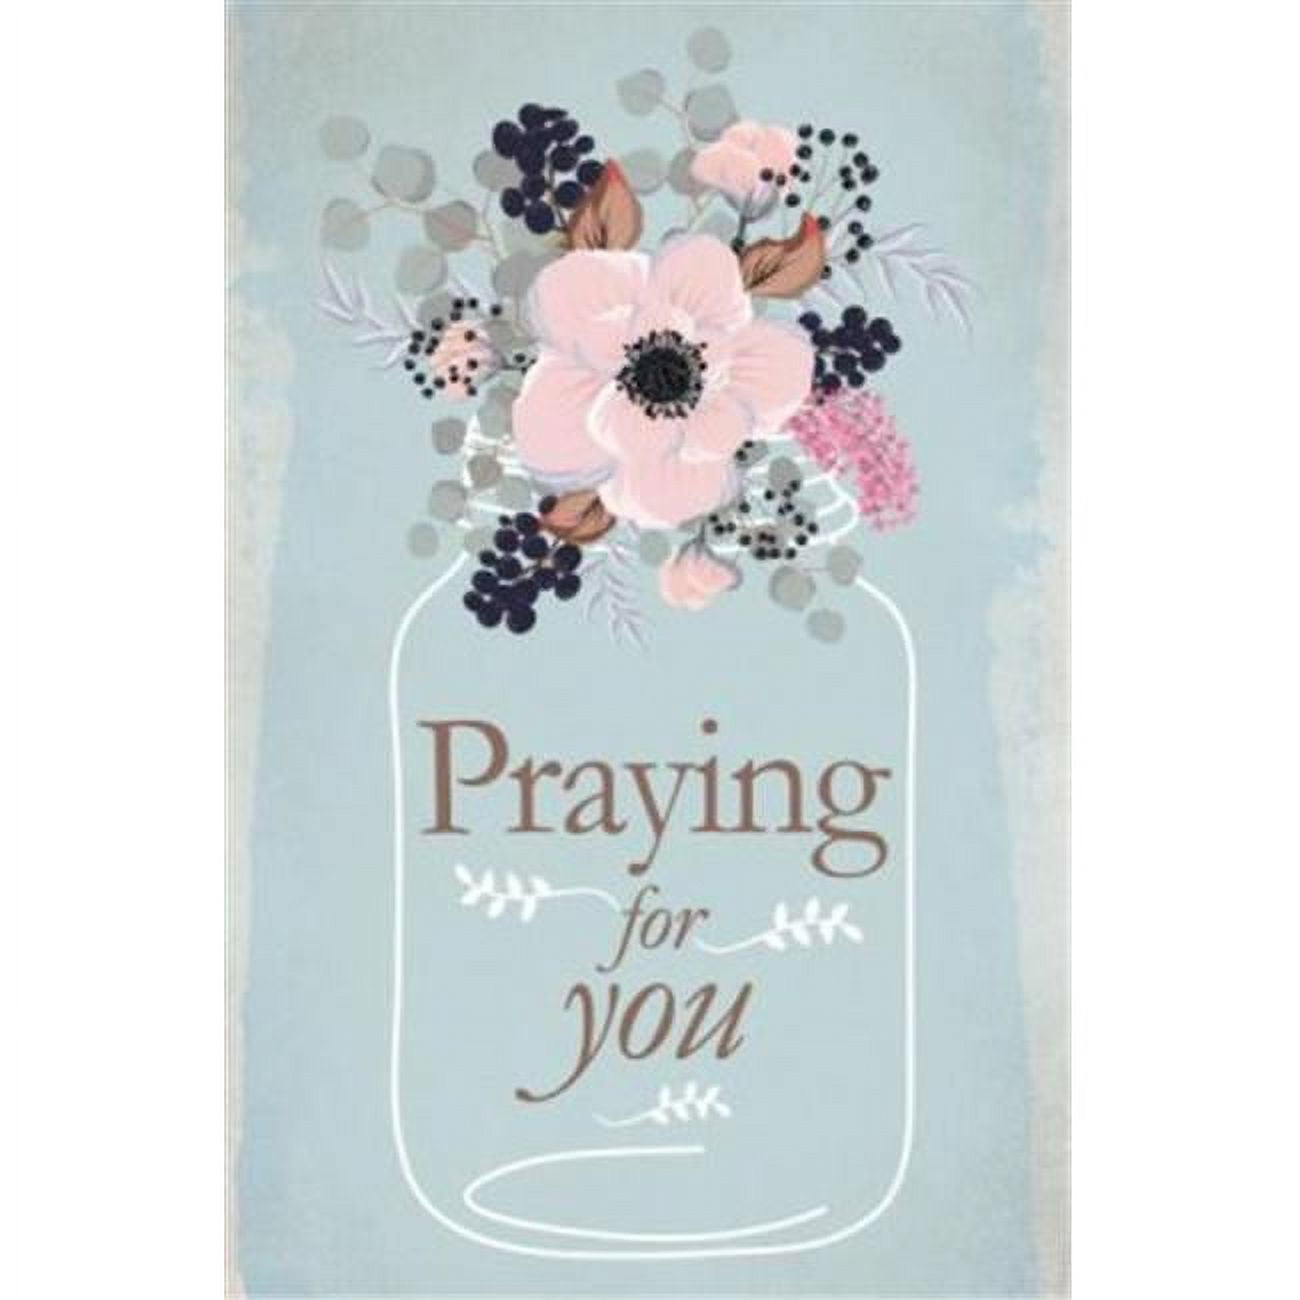 Picture of B & H Publishing 152702 Praying for You Postcard - Philippians 1-3 KJV - Pack of 25